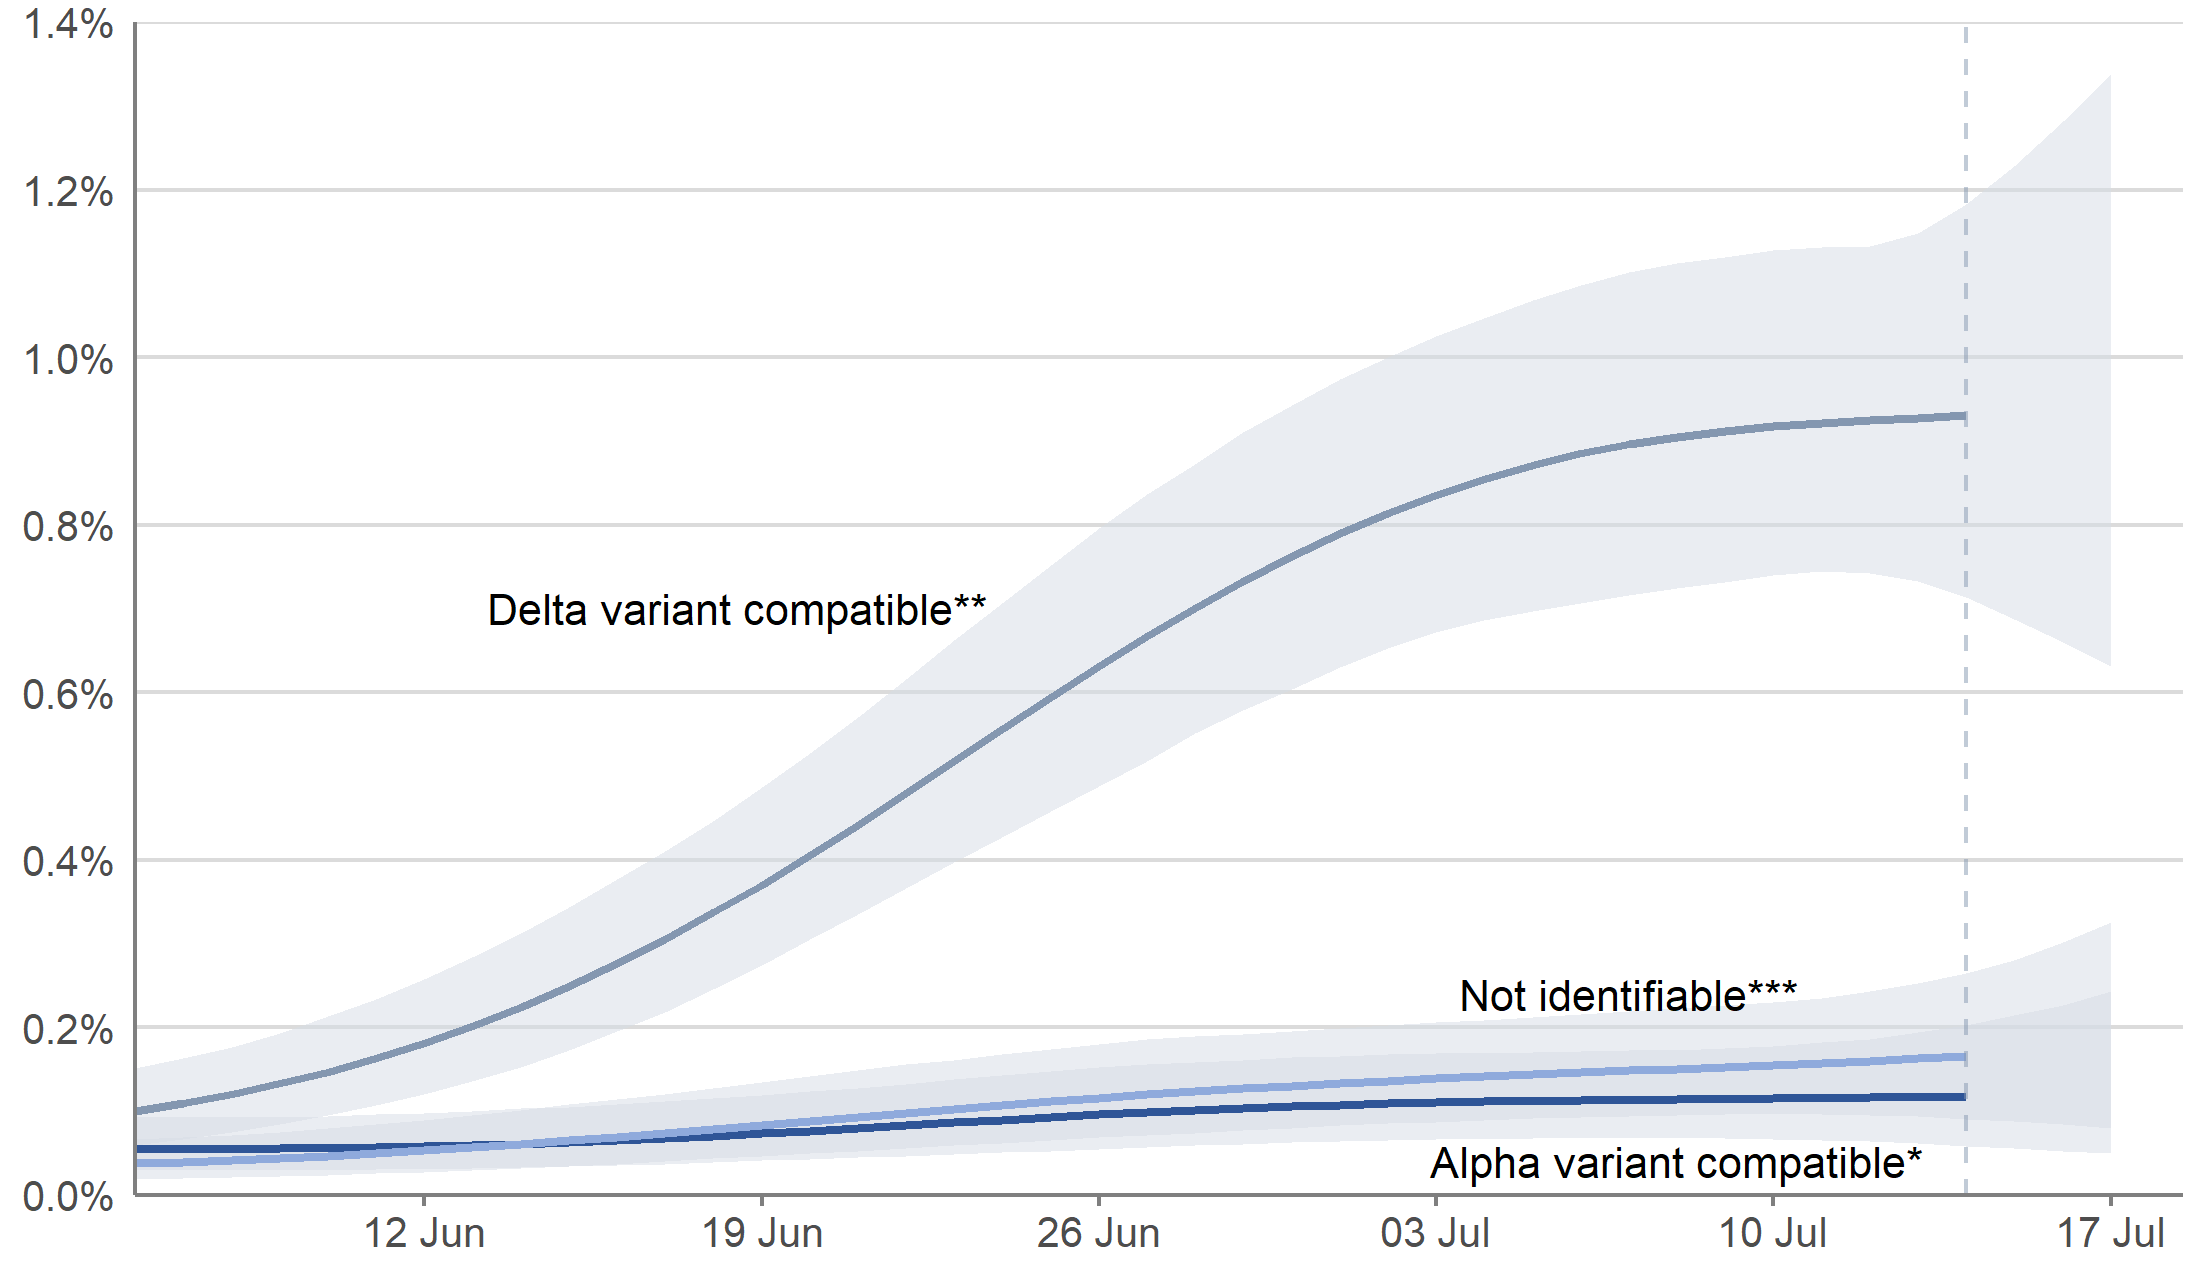 Figure 8: Estimated percentage of the population testing positive that are compatible with Delta variant, compatible with the Alpha variant, and other ‘not identifiable’ positive cases, in Scotland between 6 June and 17 July 2021 (See notes 2,4,5).